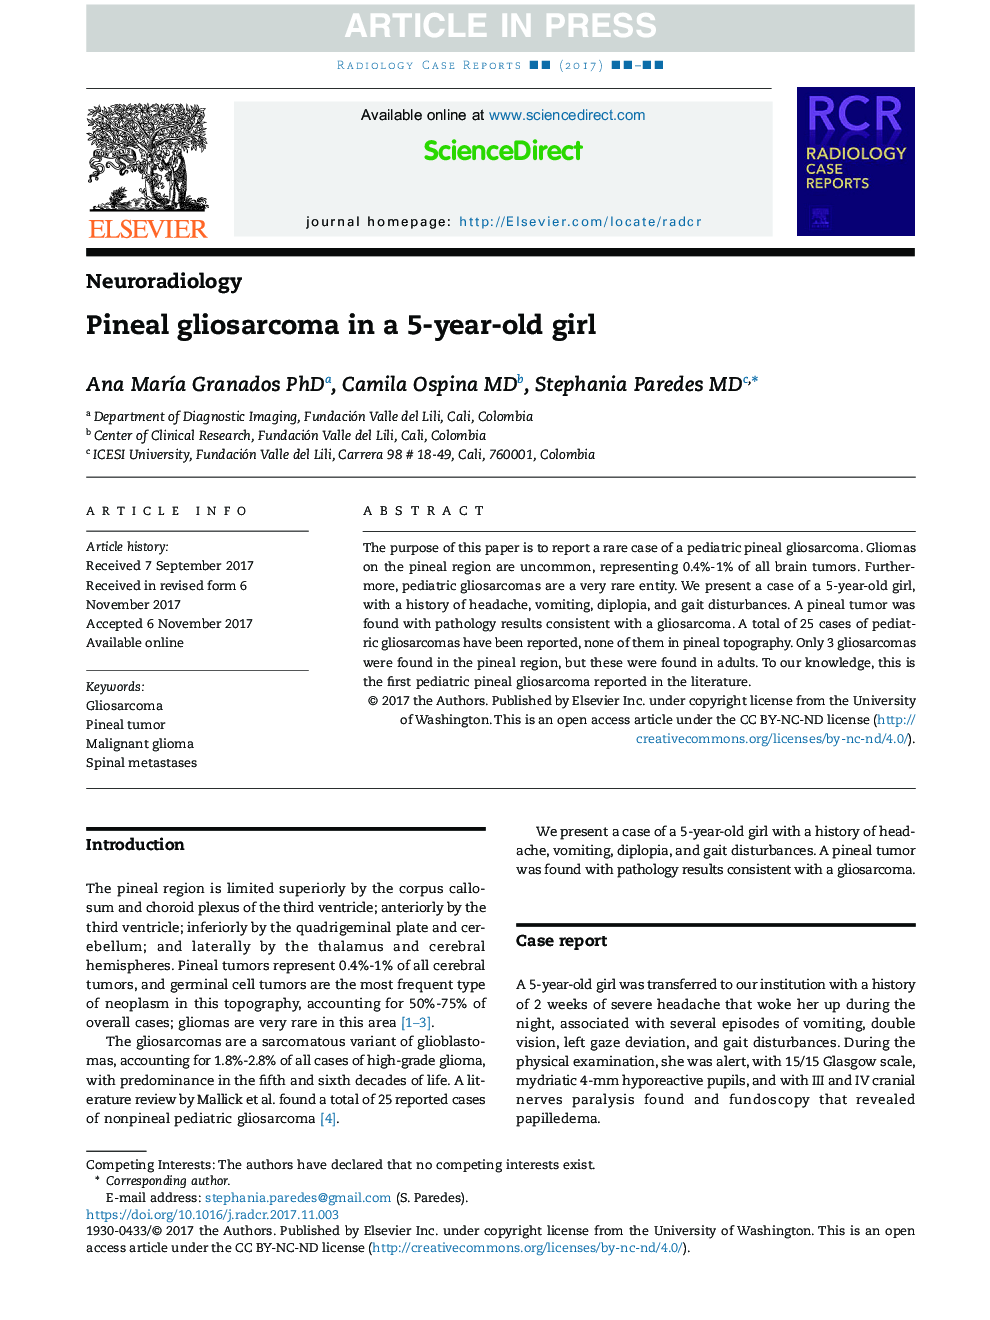 Pineal gliosarcoma in a 5-year-old girl